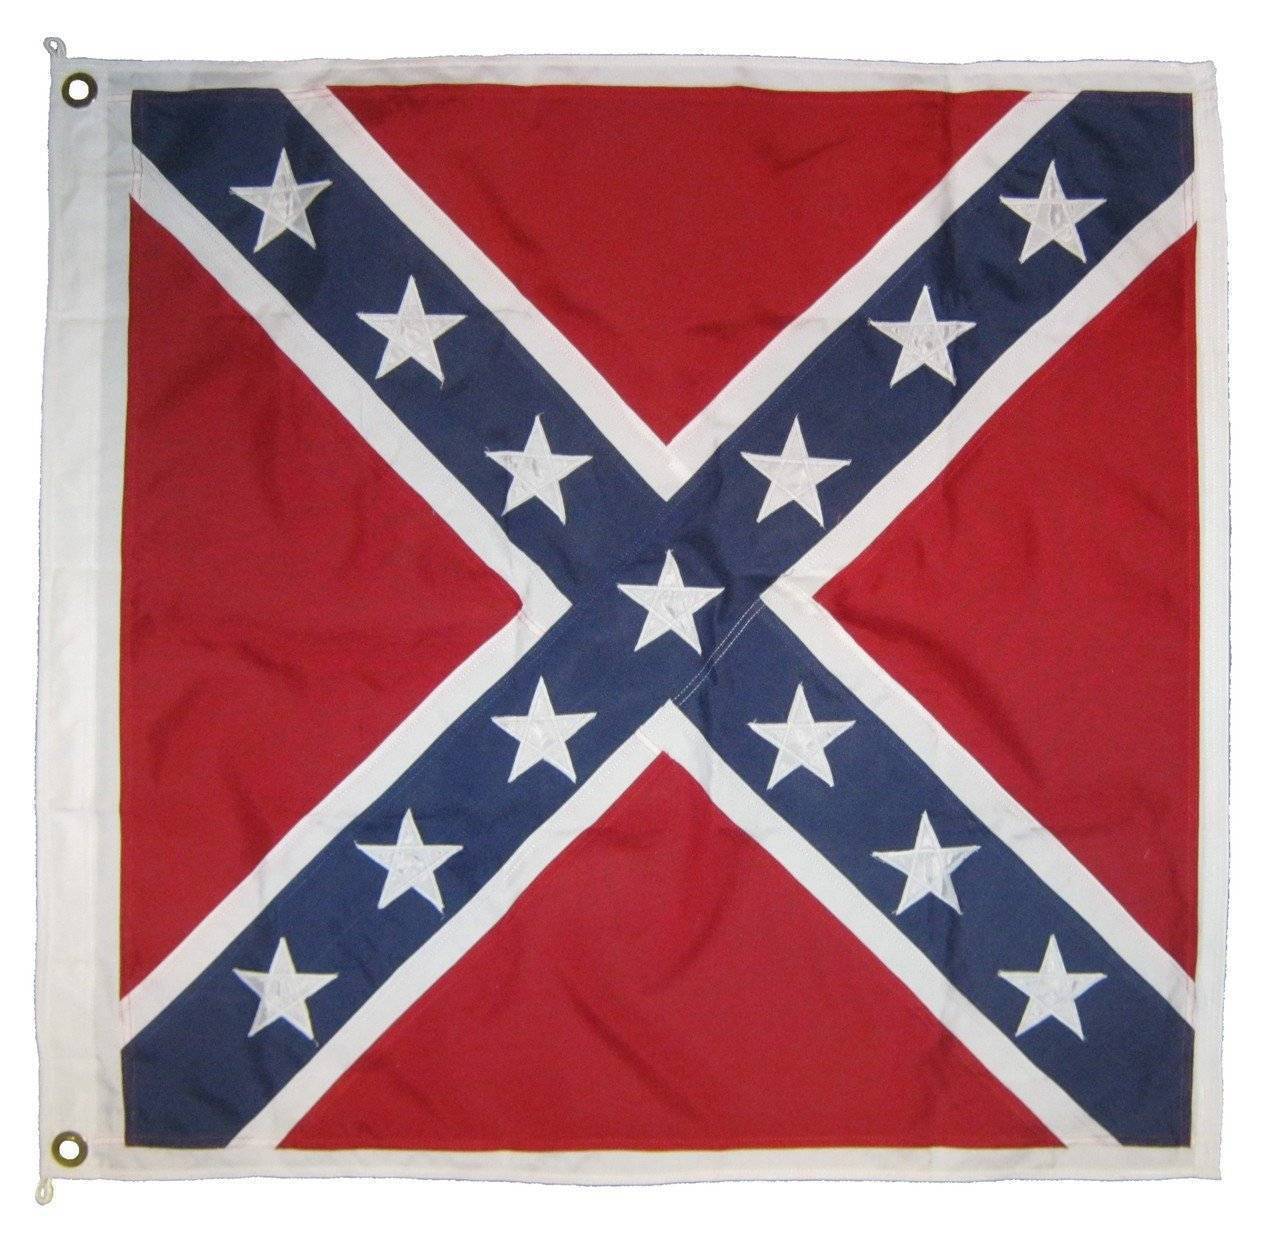 Ru Flag 52x52 Inch Rebel Confederate Battle Flag Calvary Cotton with Grommets